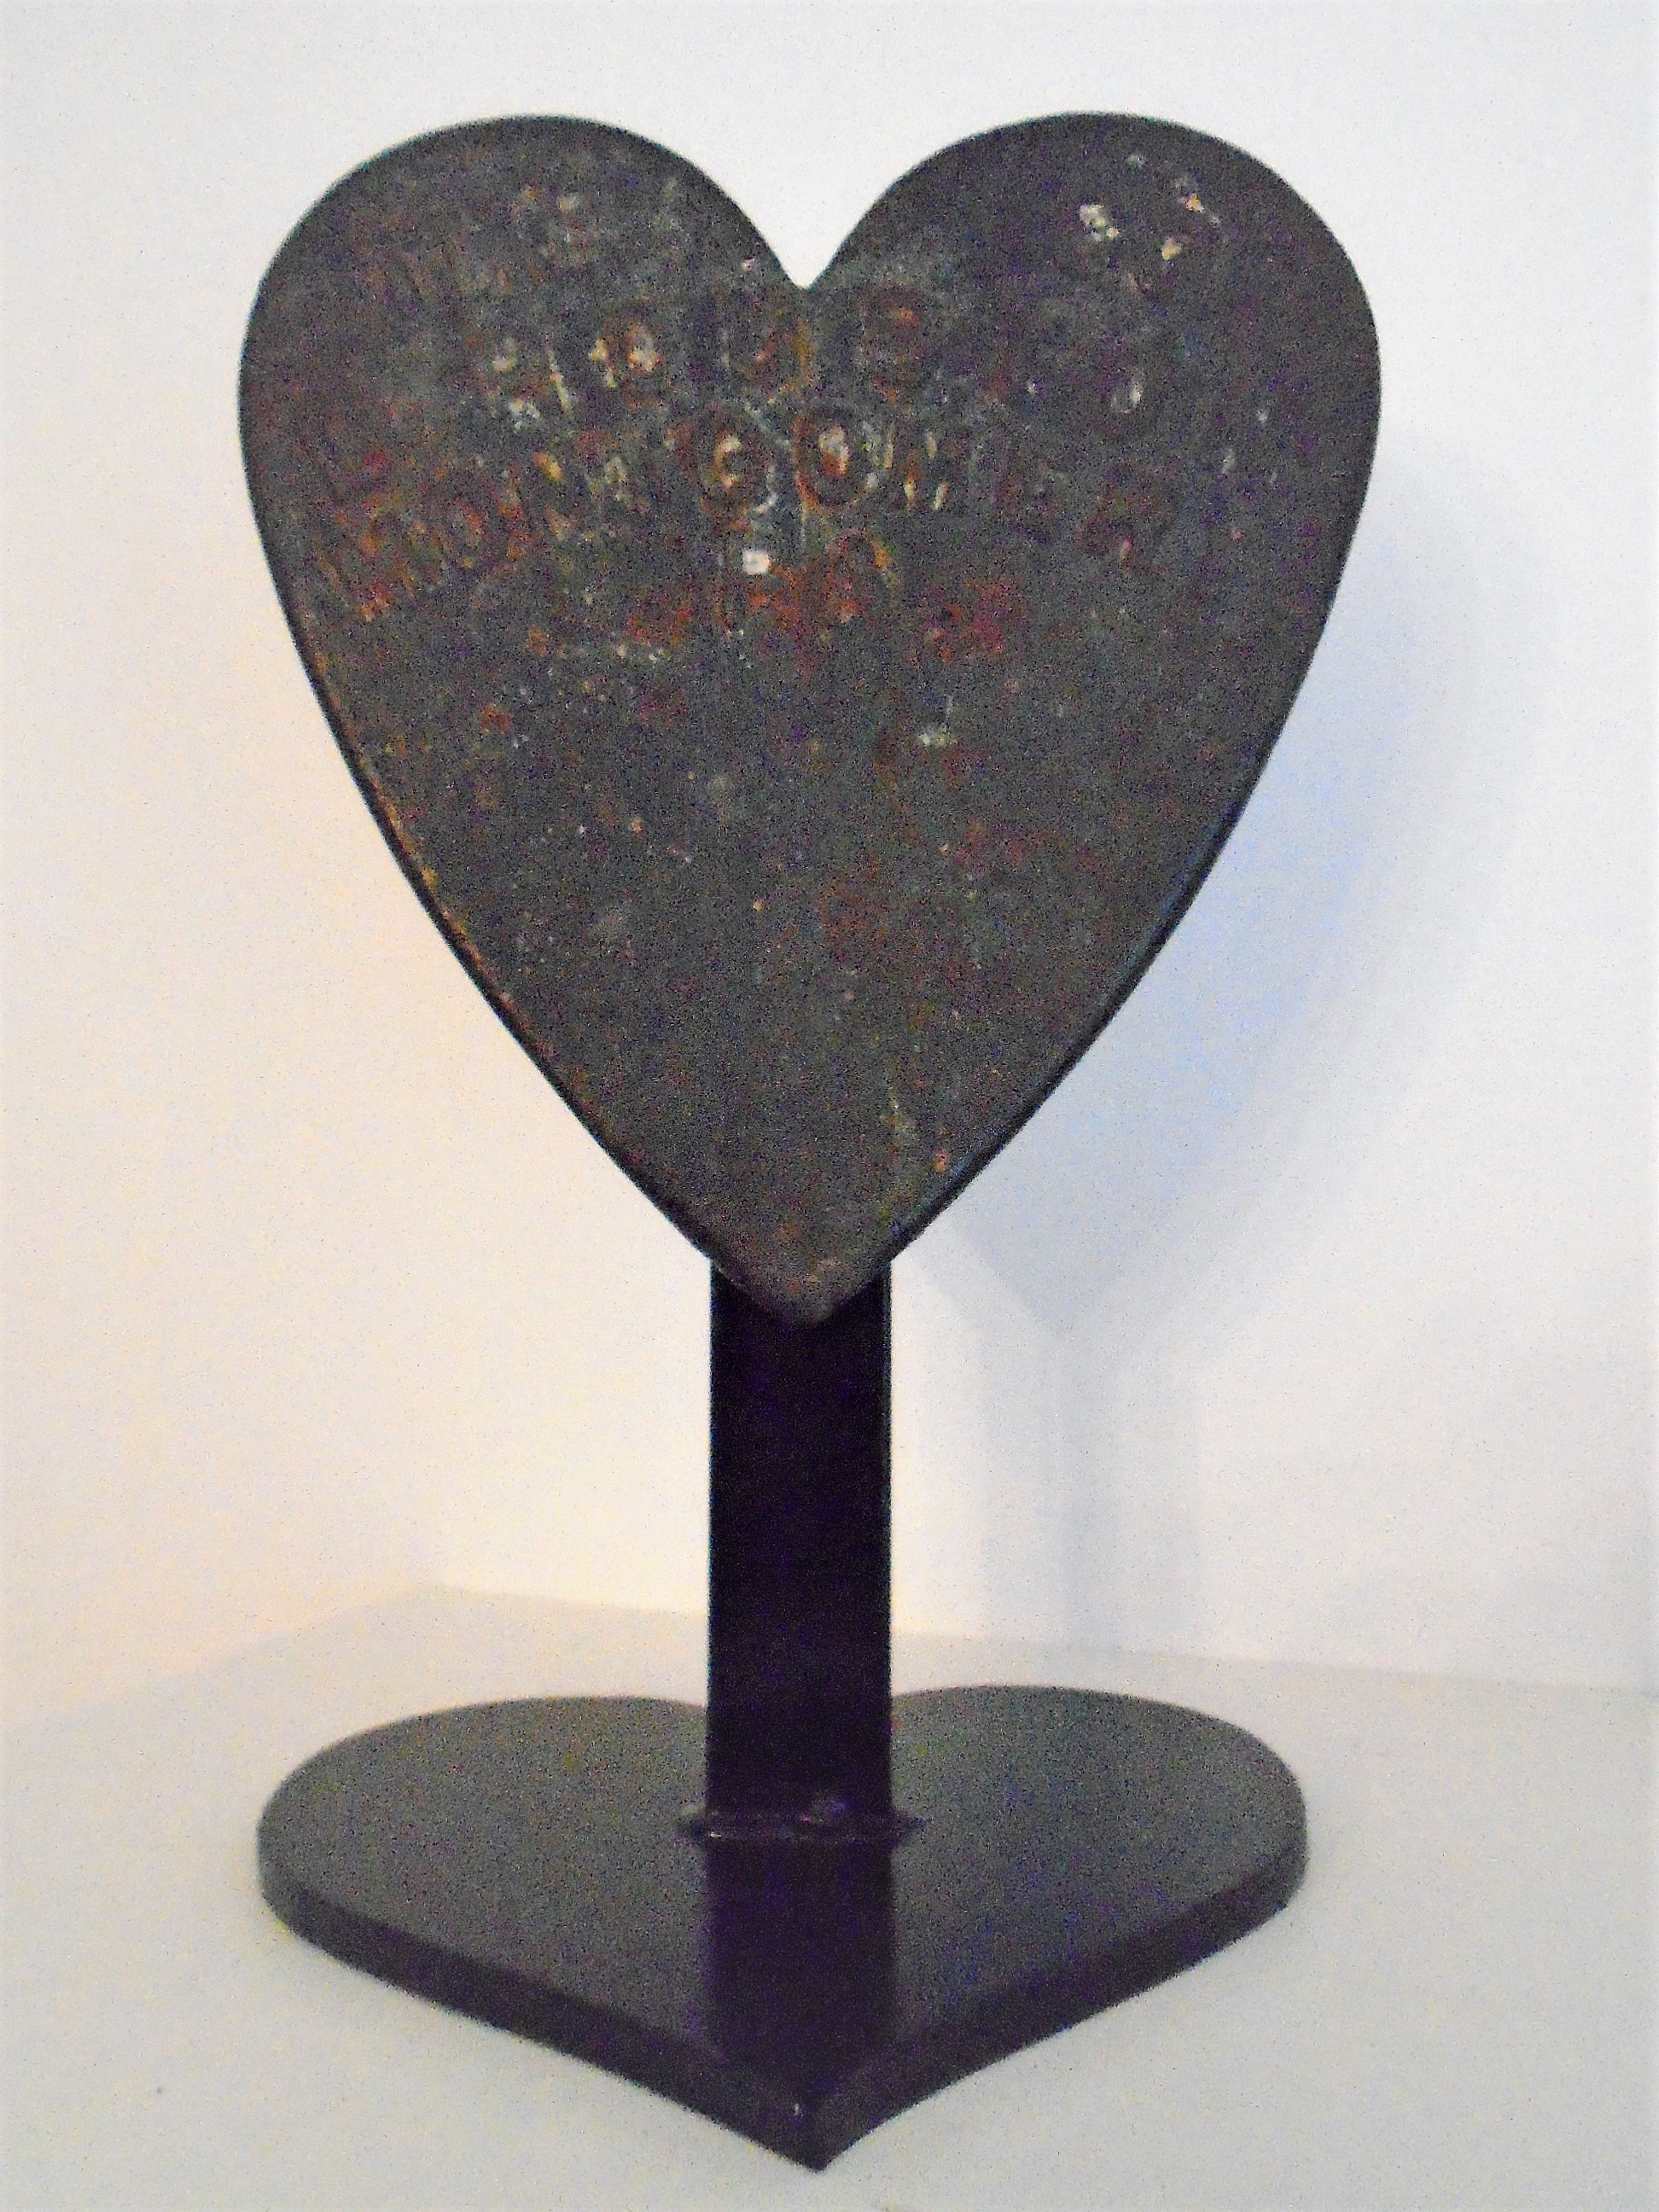 A CAST IRON WEIGHT IN THE SHAPE OF A HEART